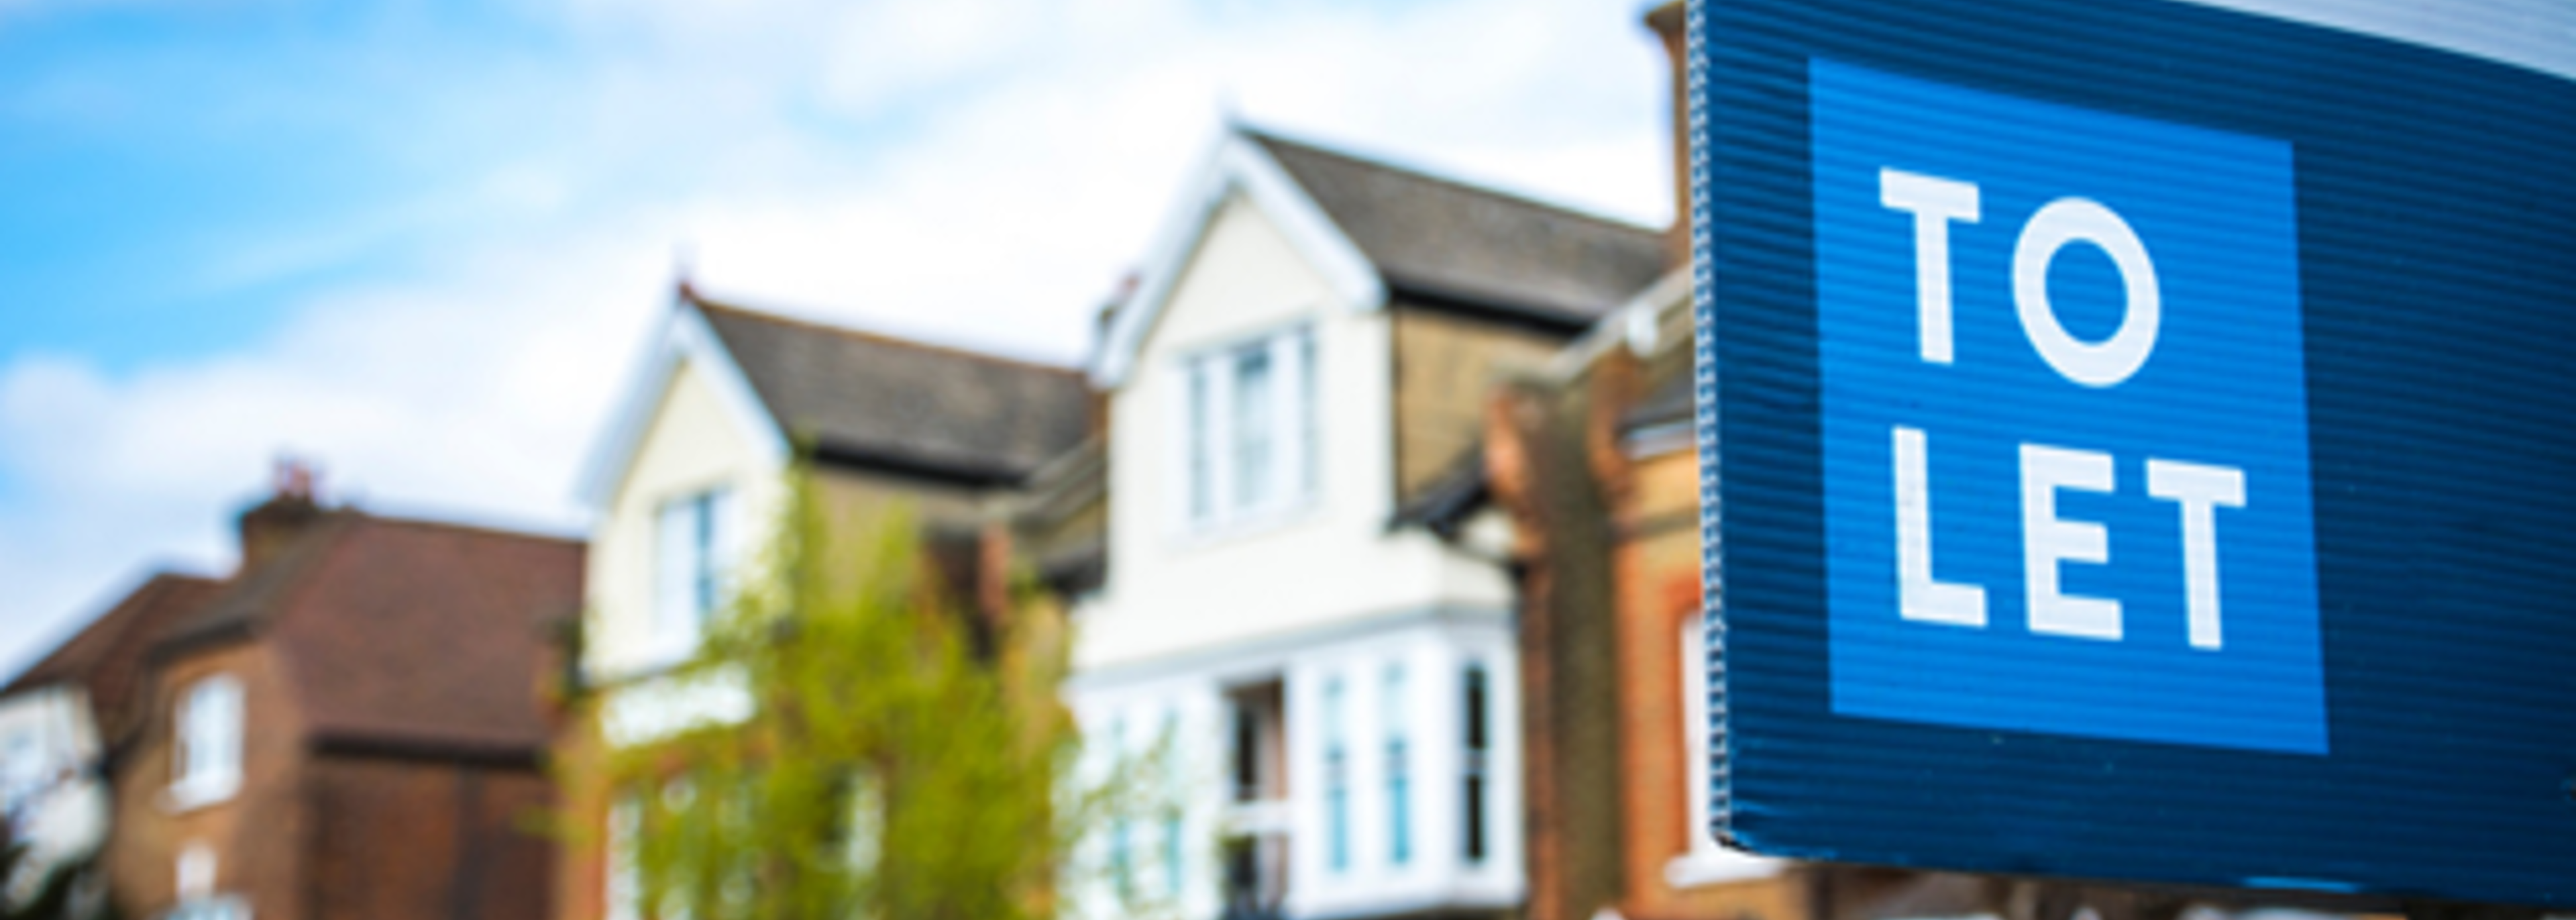 Research reveals rising average housing rents in Britain